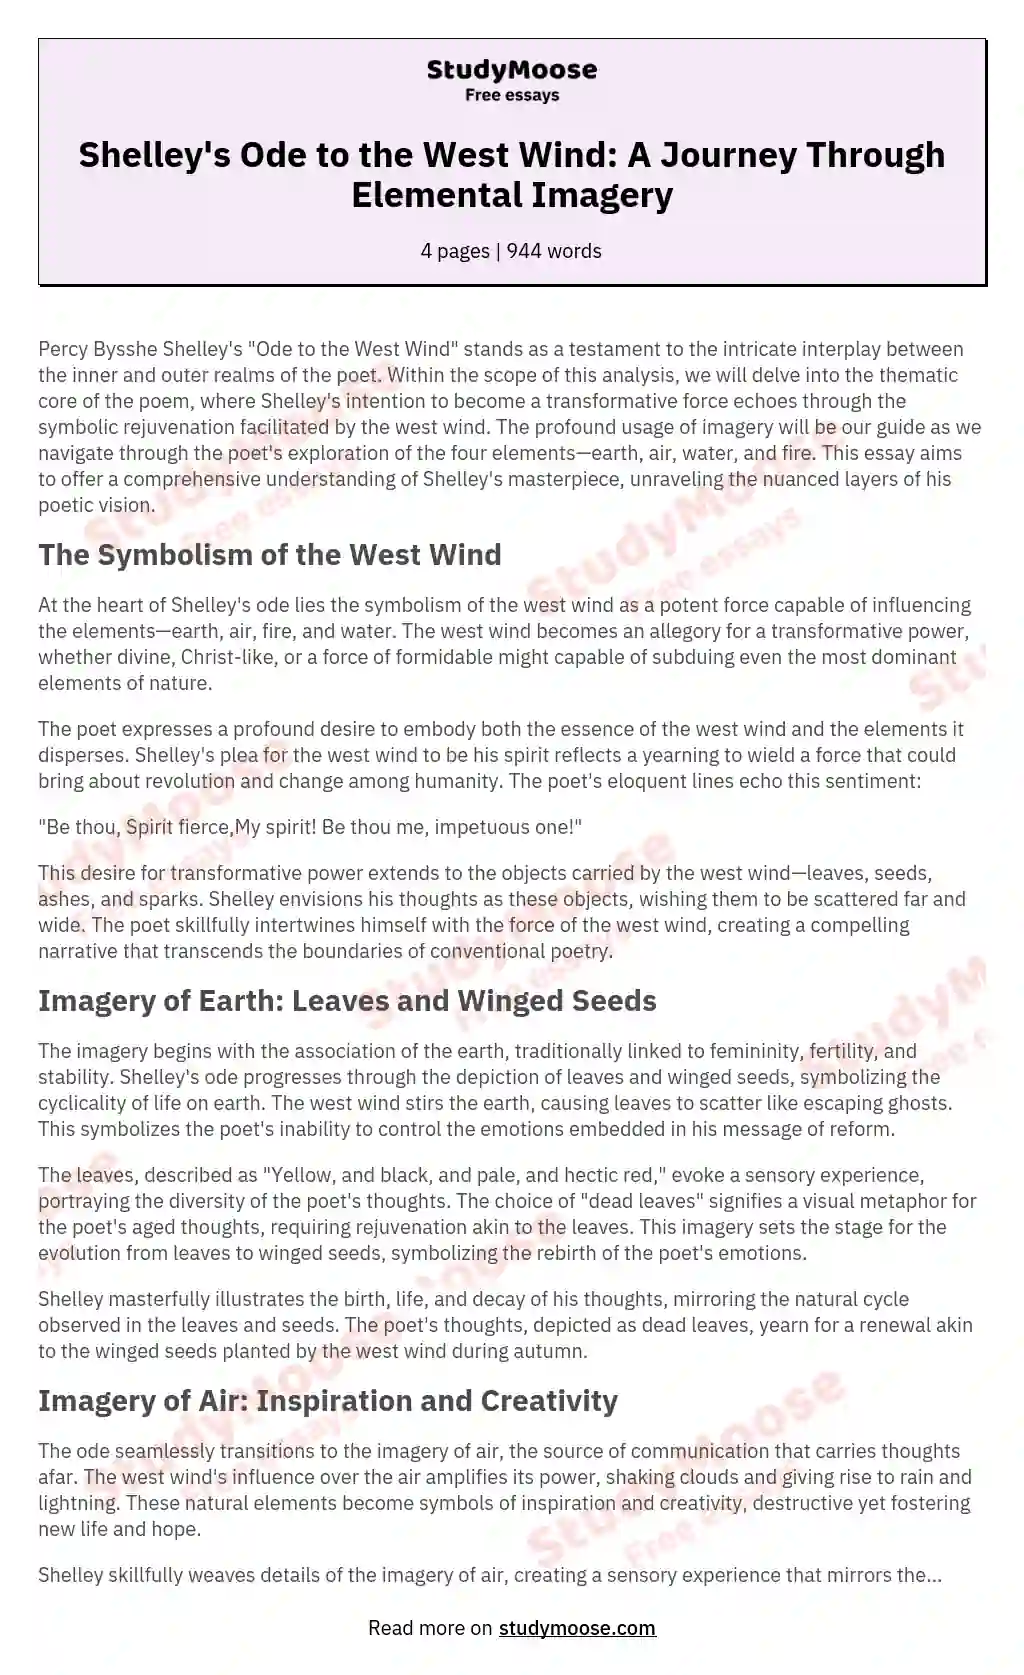 Shelley's Ode to the West Wind: A Journey Through Elemental Imagery essay